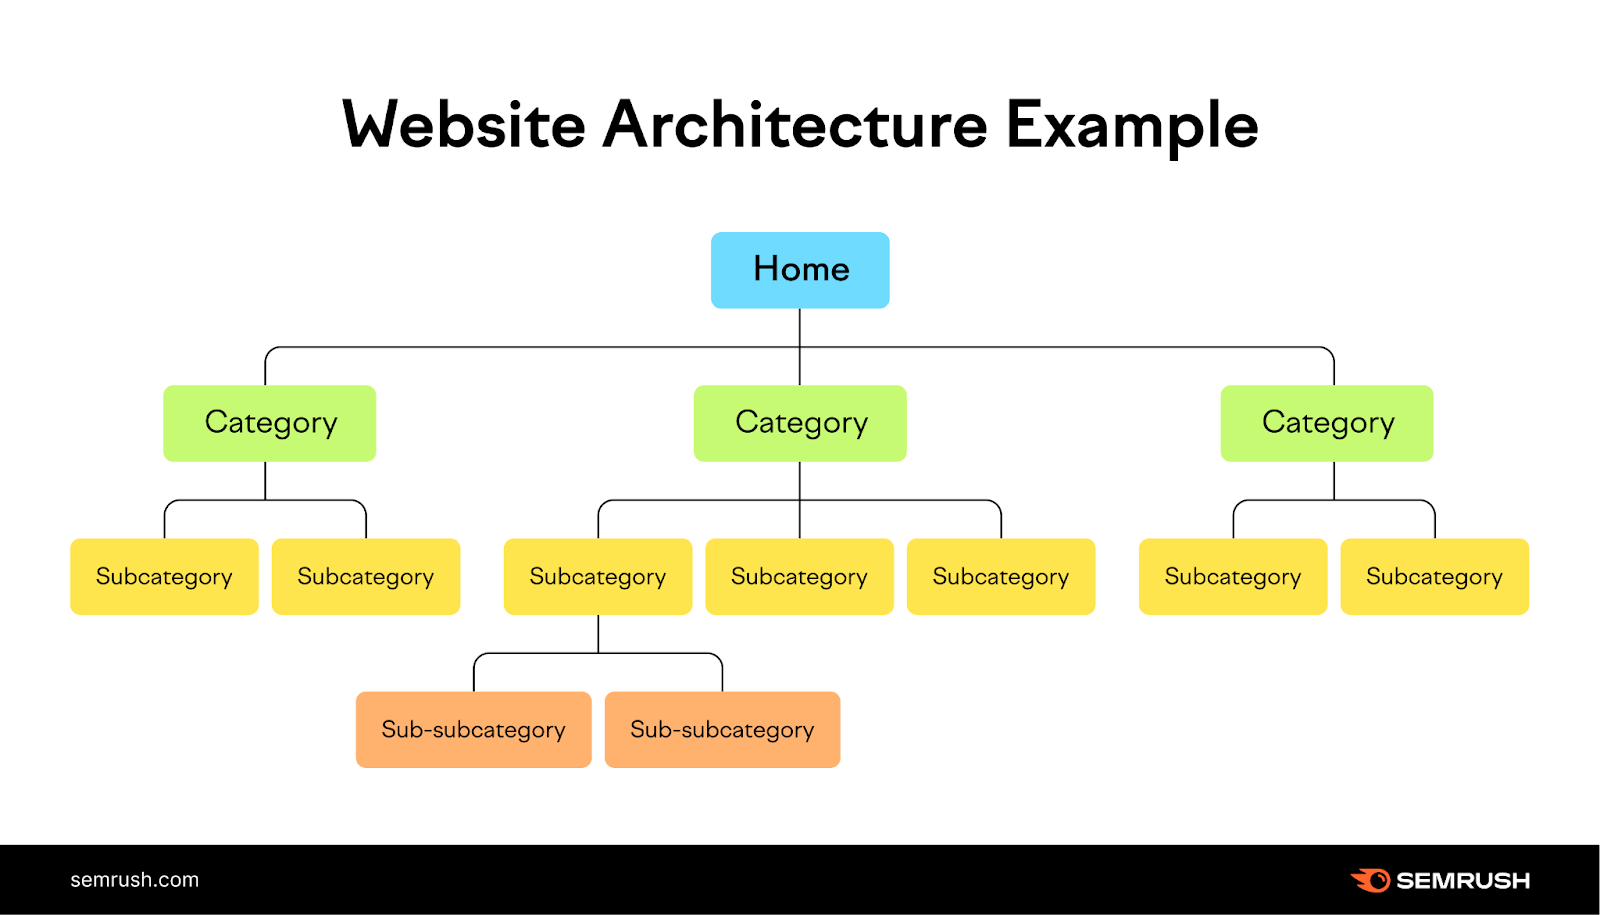 Website architecture with Home branching into Category pages past    Subcategory pages.